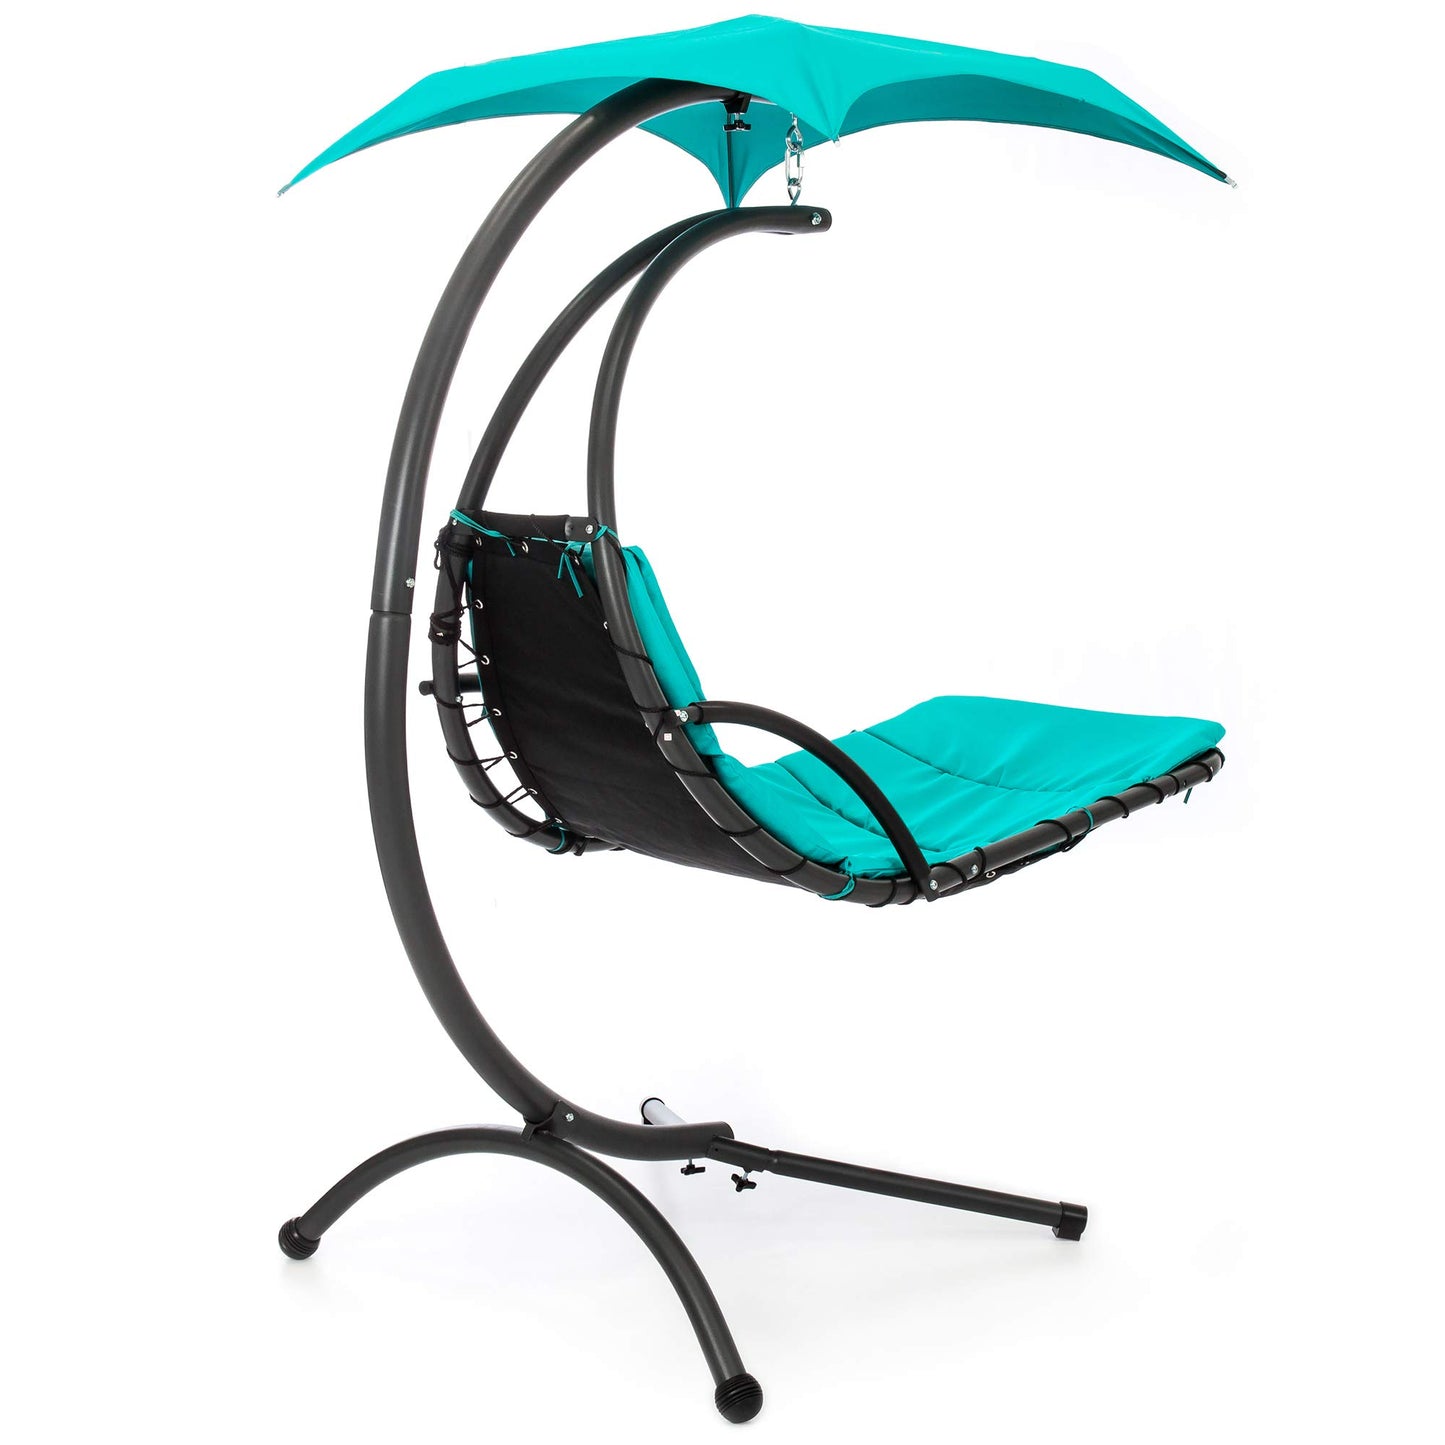 Hanging Curved Chaise Lounge Chair - Best Choice Products